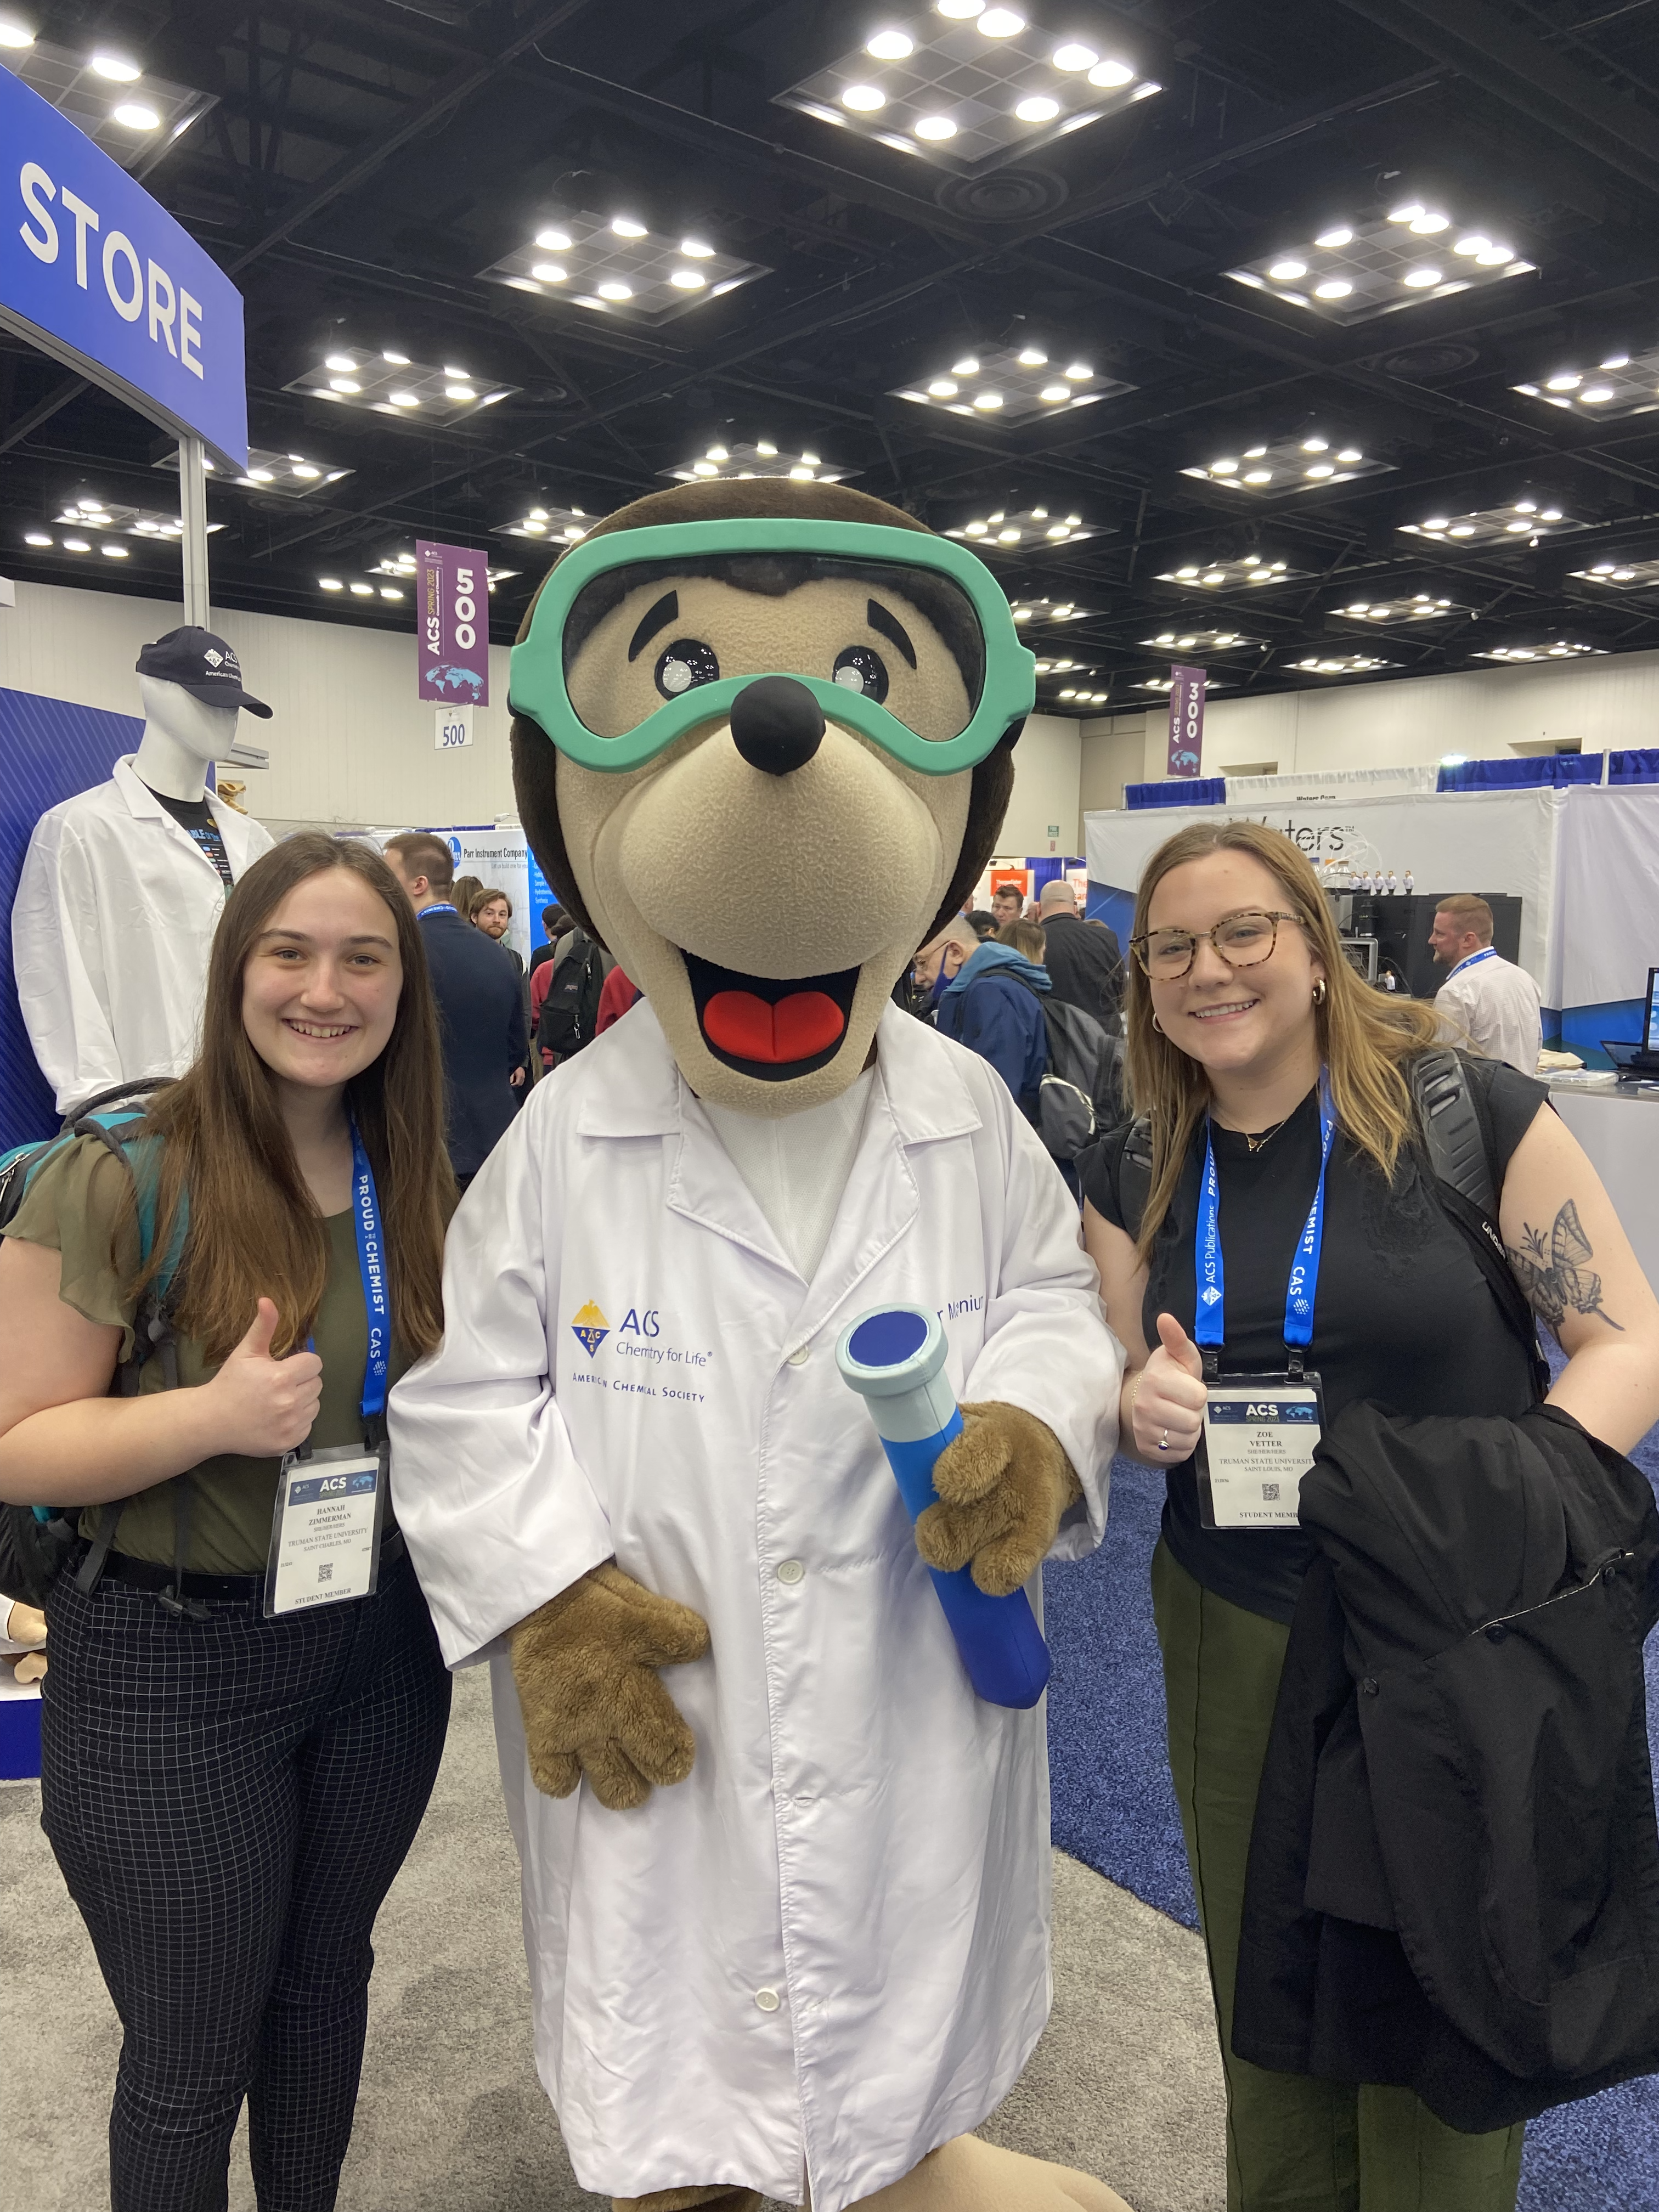 Hannah (left) and Zoe (right) posing with the ACS mole (middle). If you look carefully, you can see Dominic photo bombing just over the right shoulder of the mole.